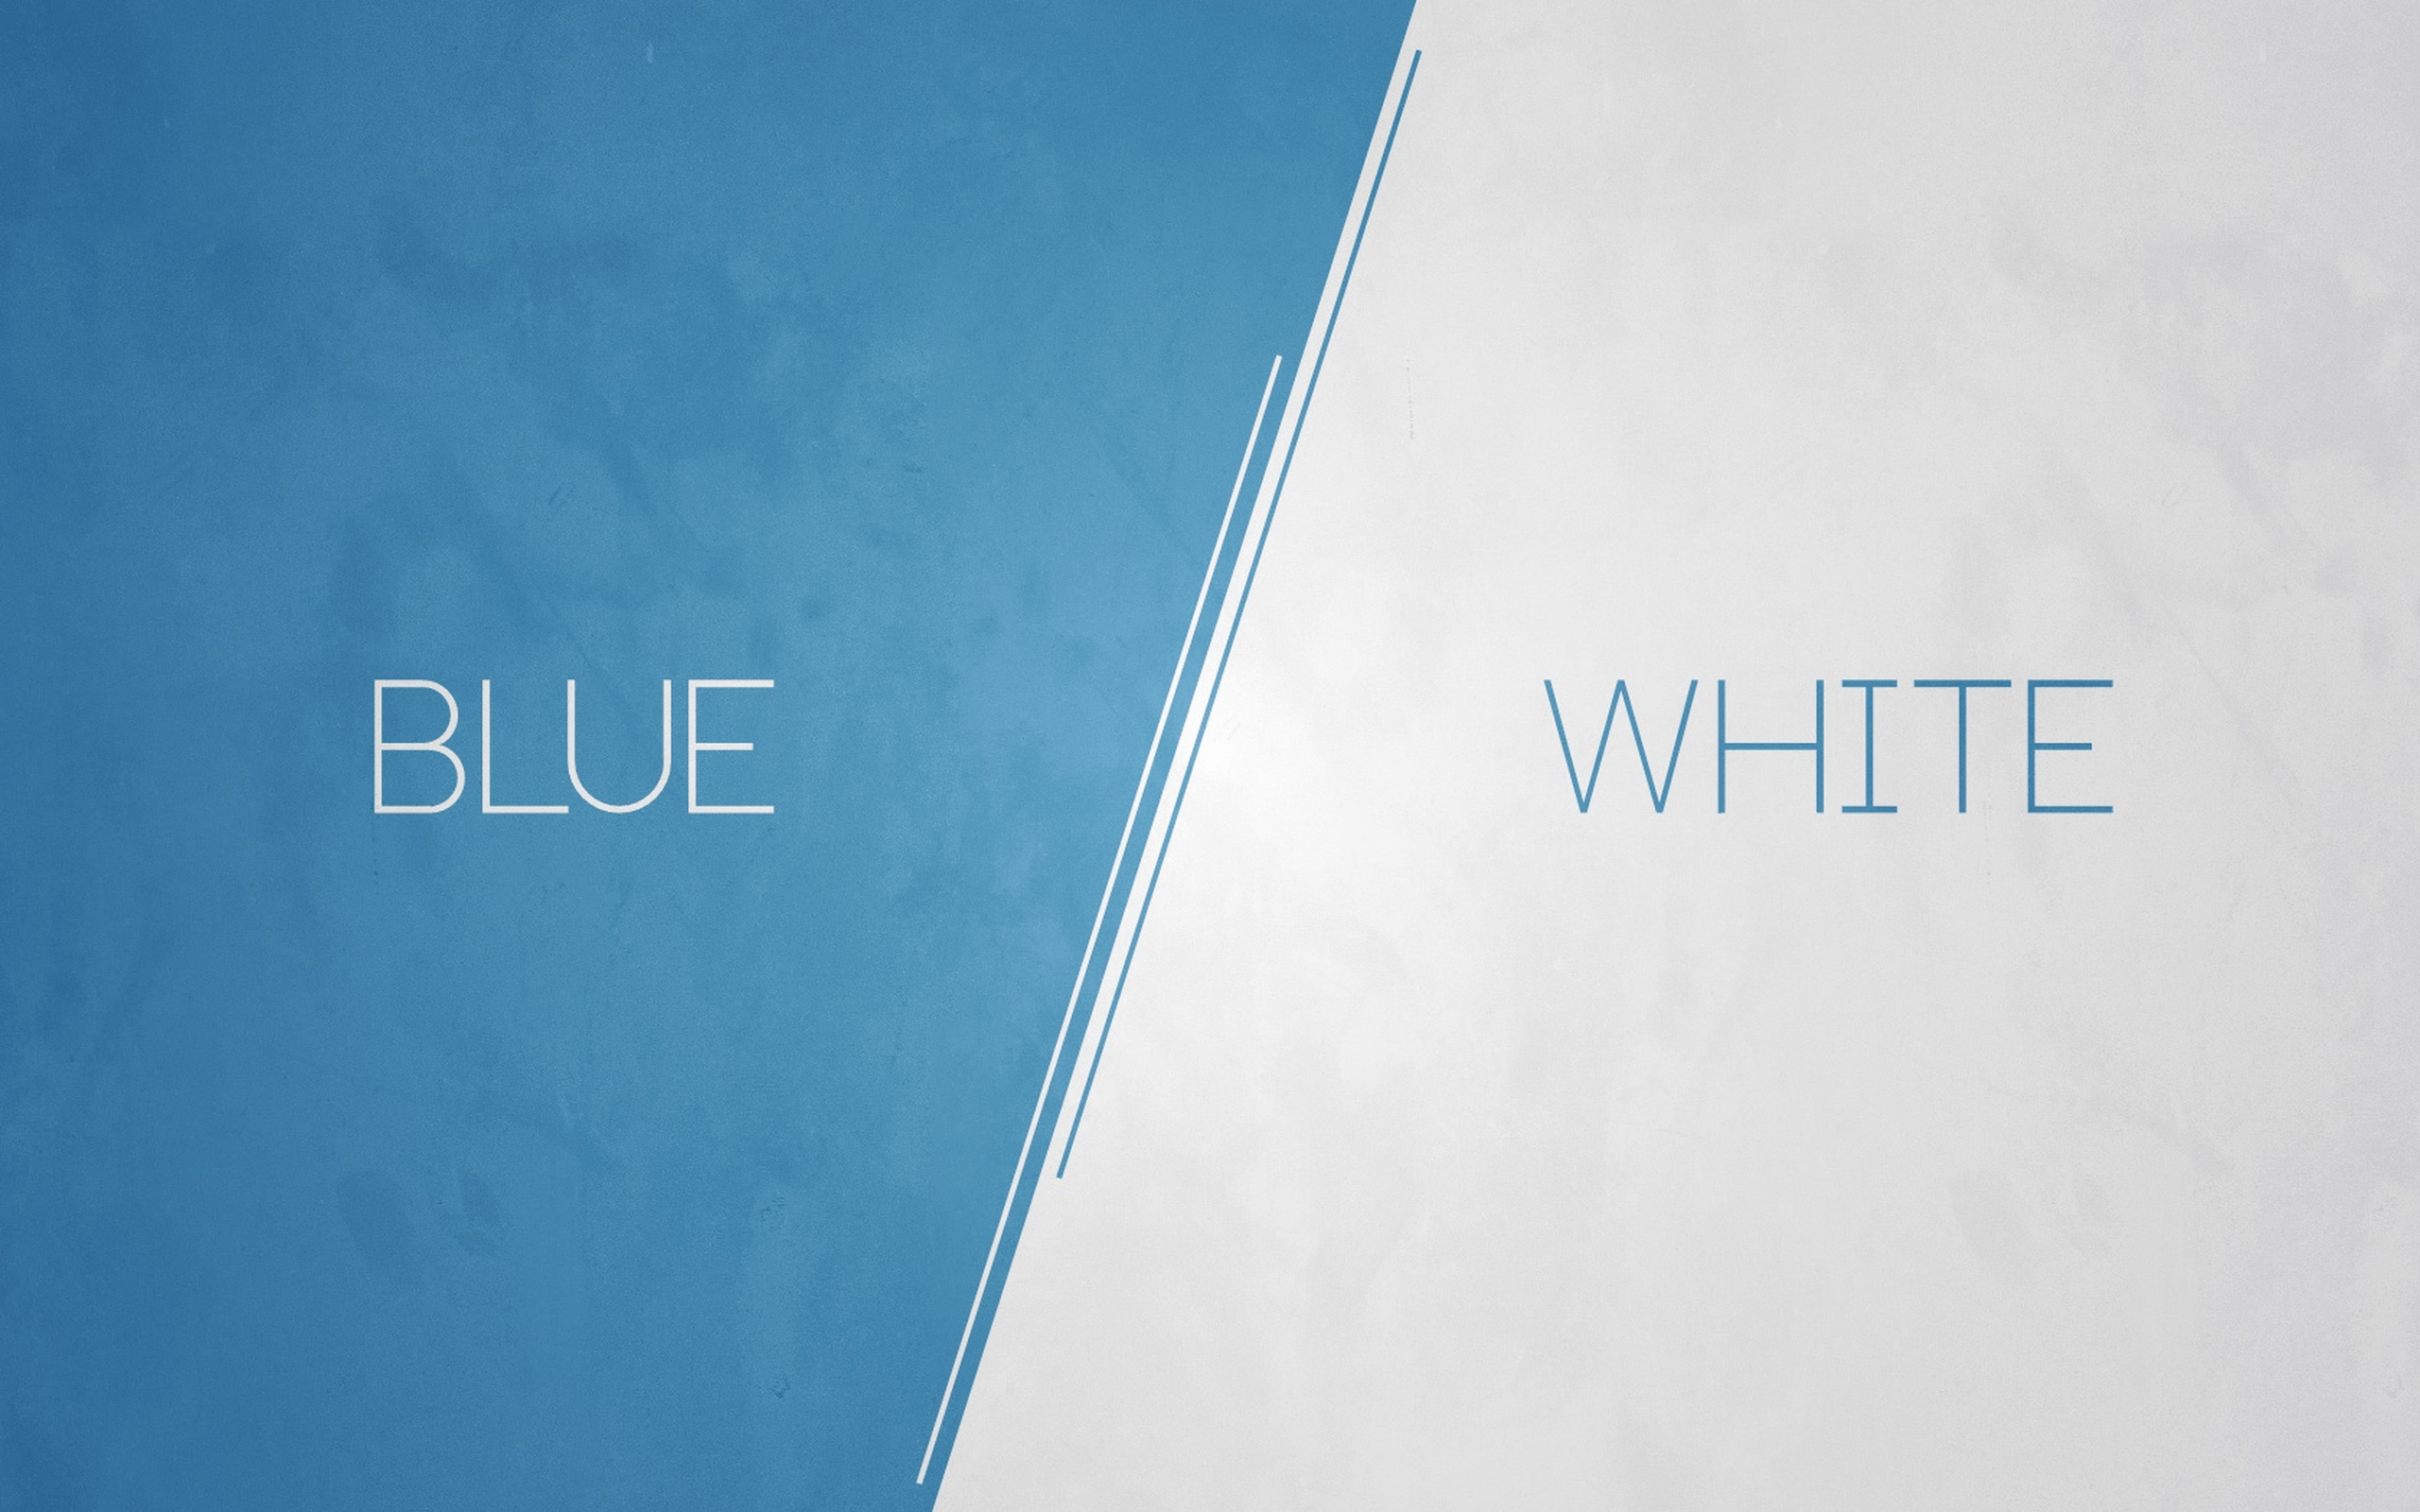 Blue vs white, HD Abstract, 4k Wallpapers, Image, Backgrounds